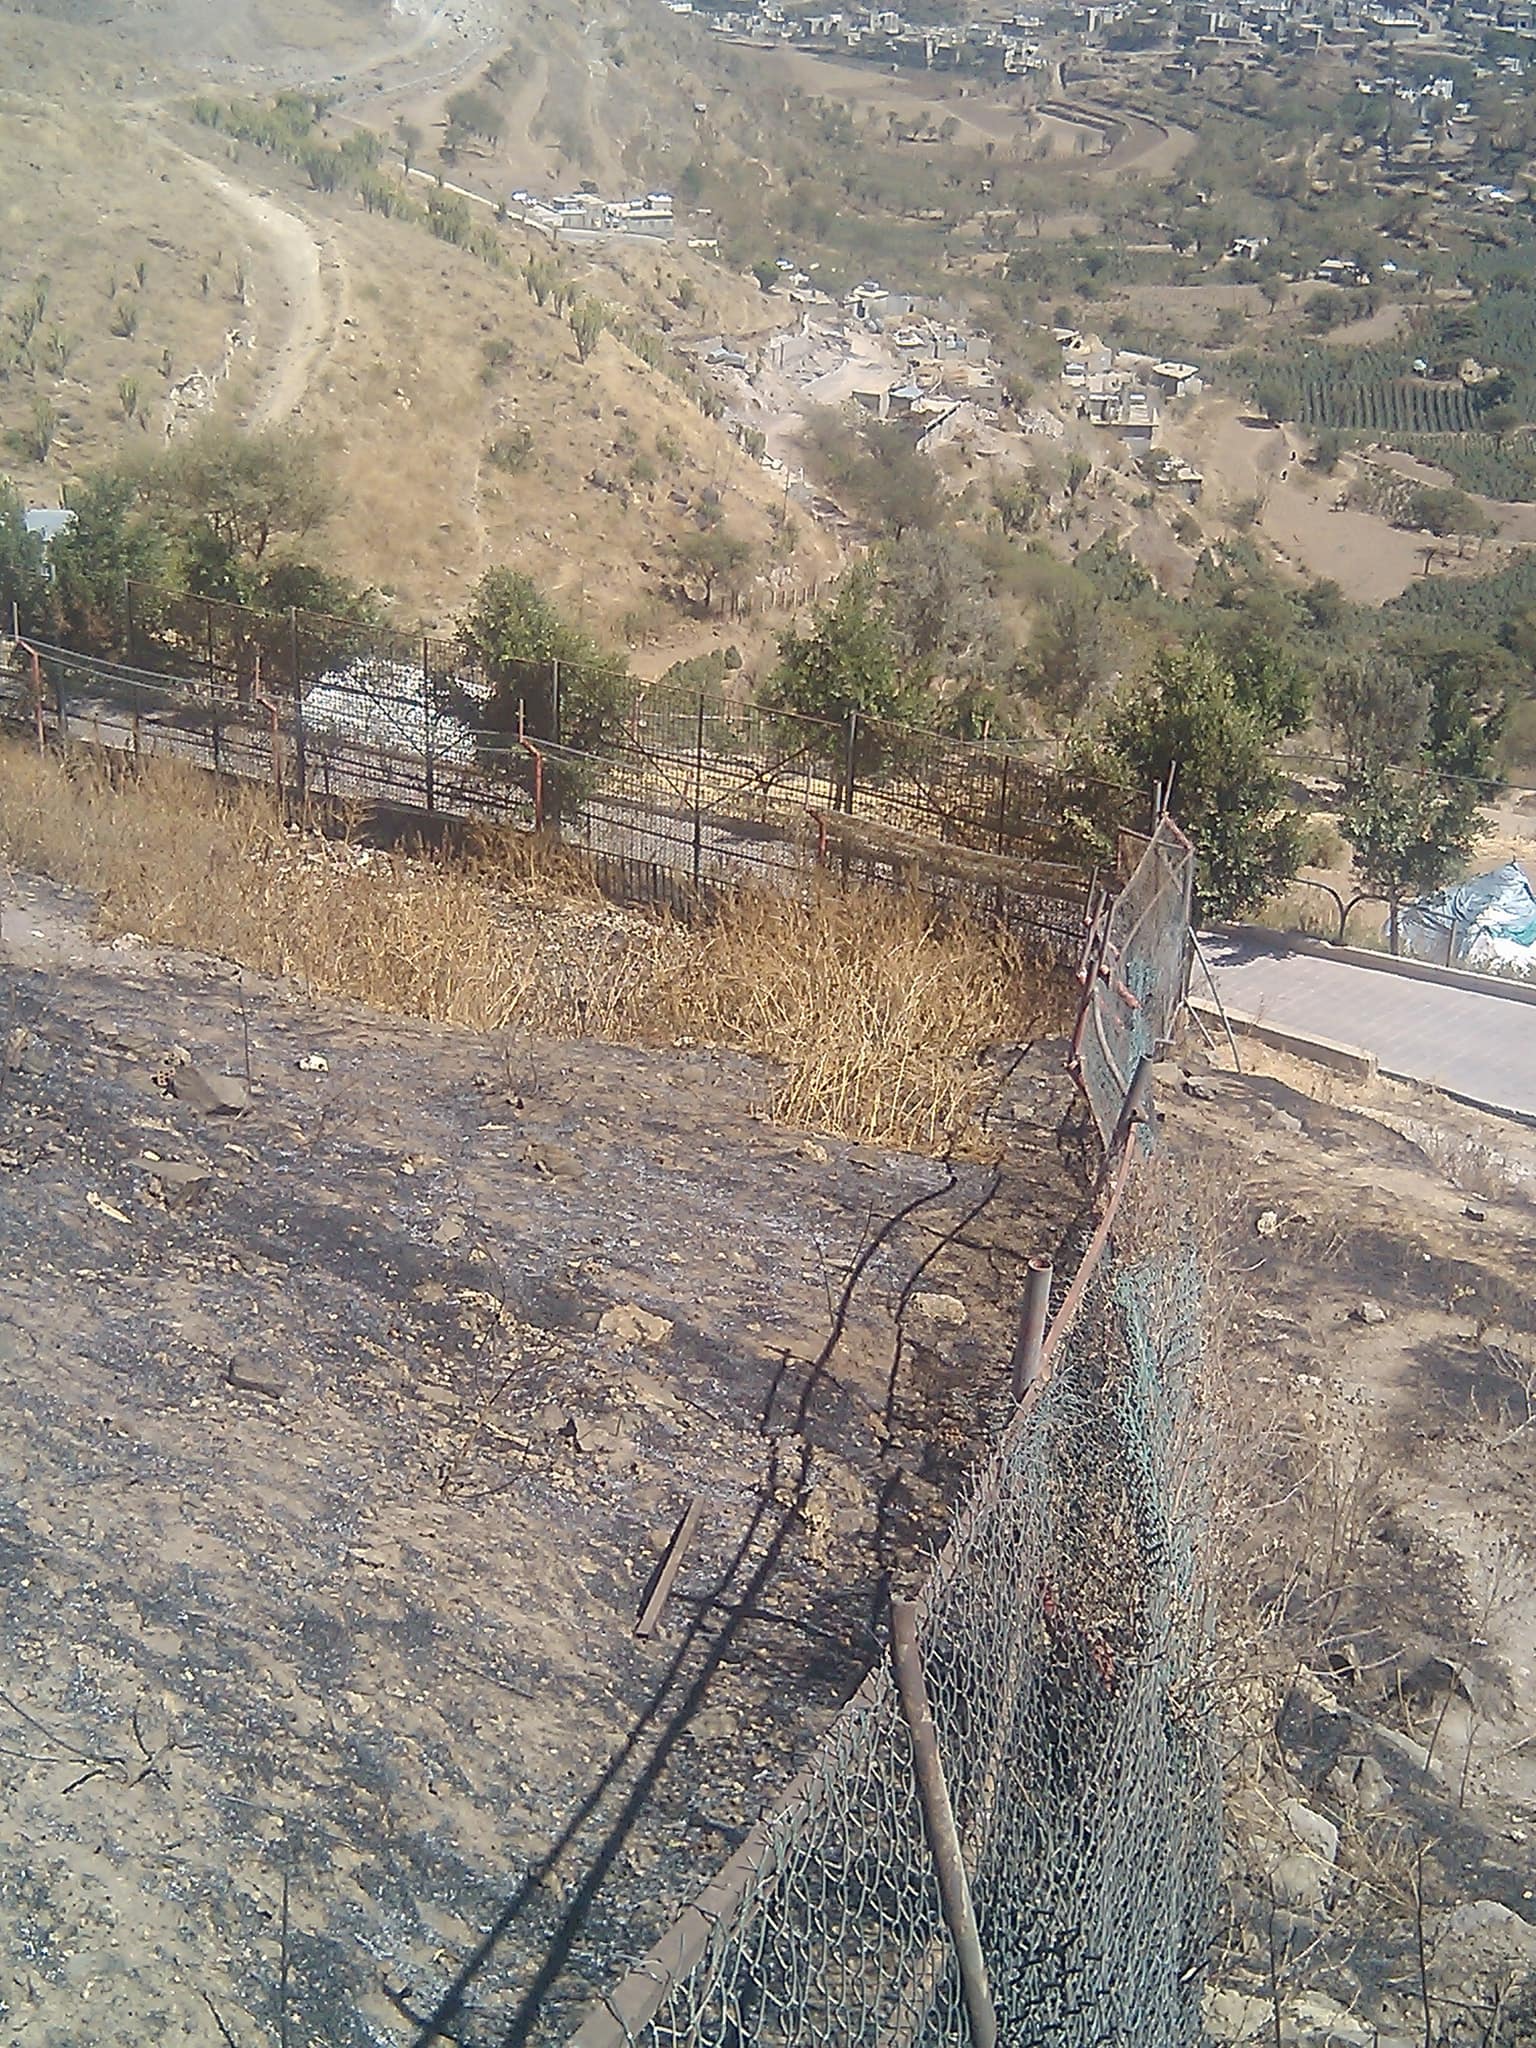 IBB ZO O LIONS OPEN RANGE enclosure with fecning to be repaired 17 FEB 2018 HAITHAM engineer.jpg